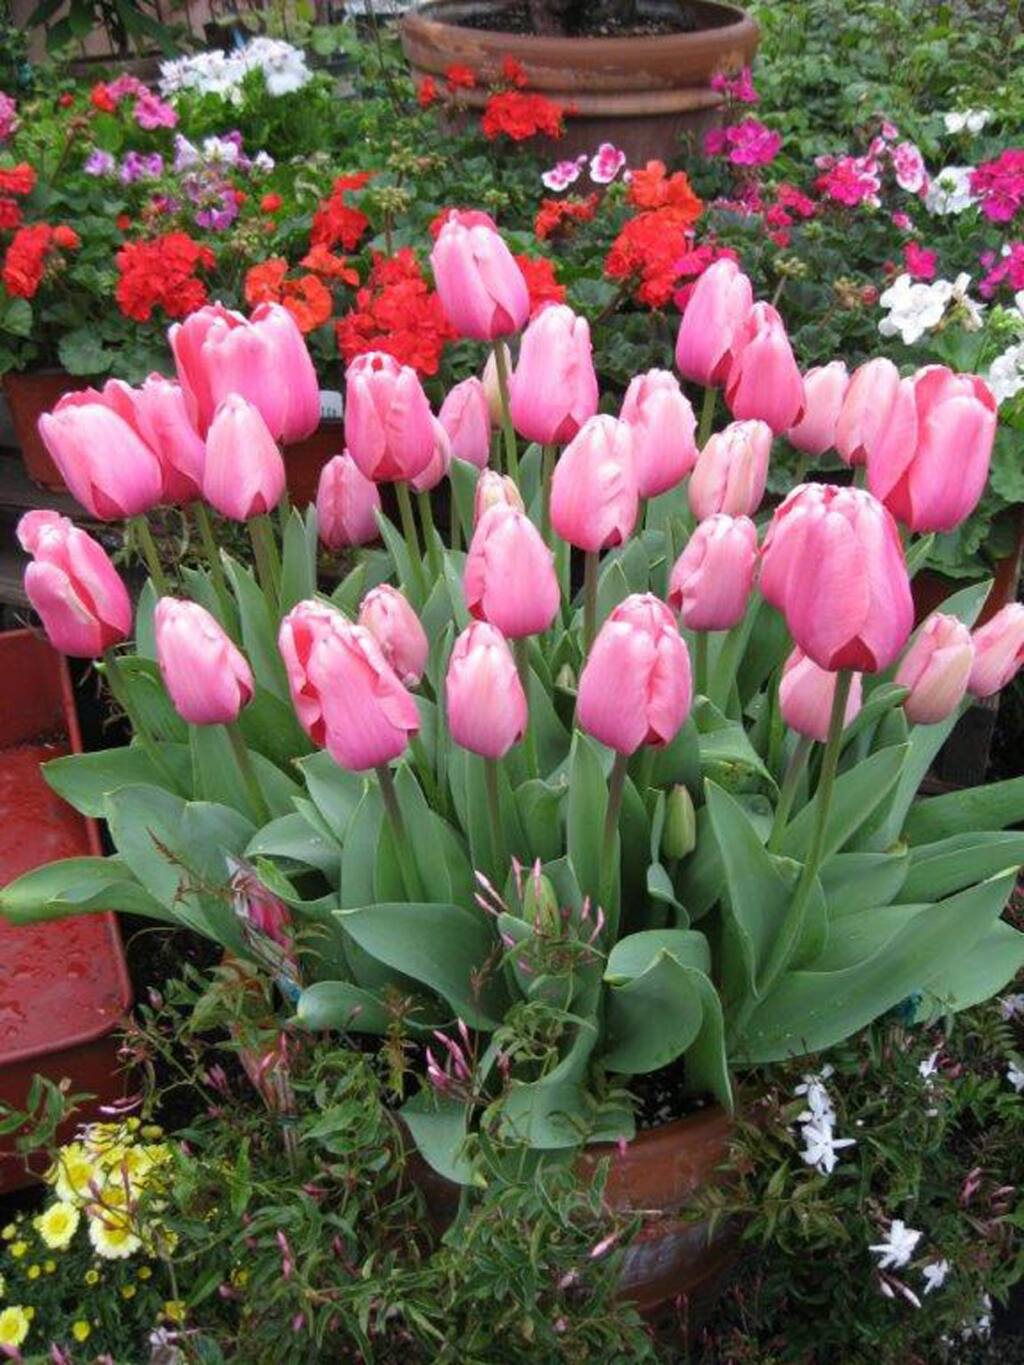 How to Grow Tulips in Southern California